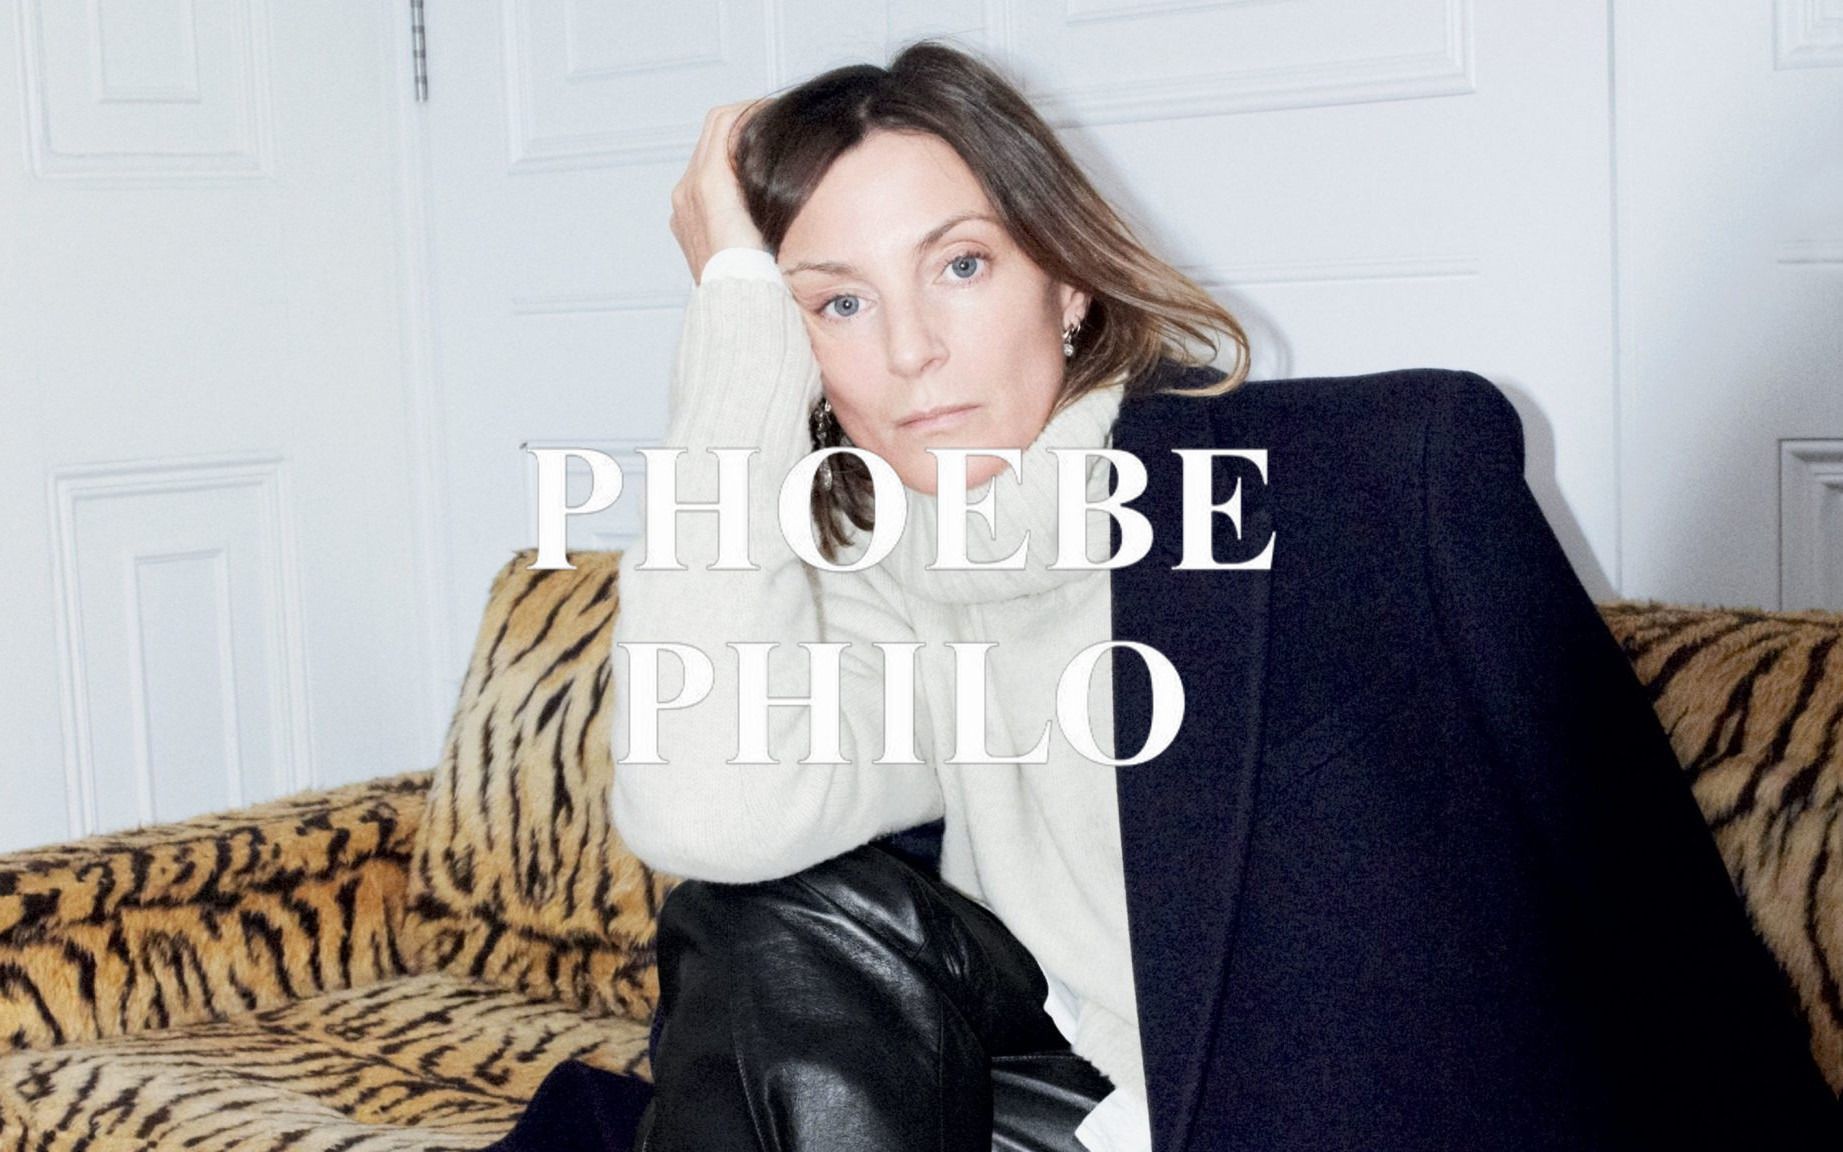 Reputation precedes her': Phoebe Philo nearly sells out exclusive collection, Phoebe Philo